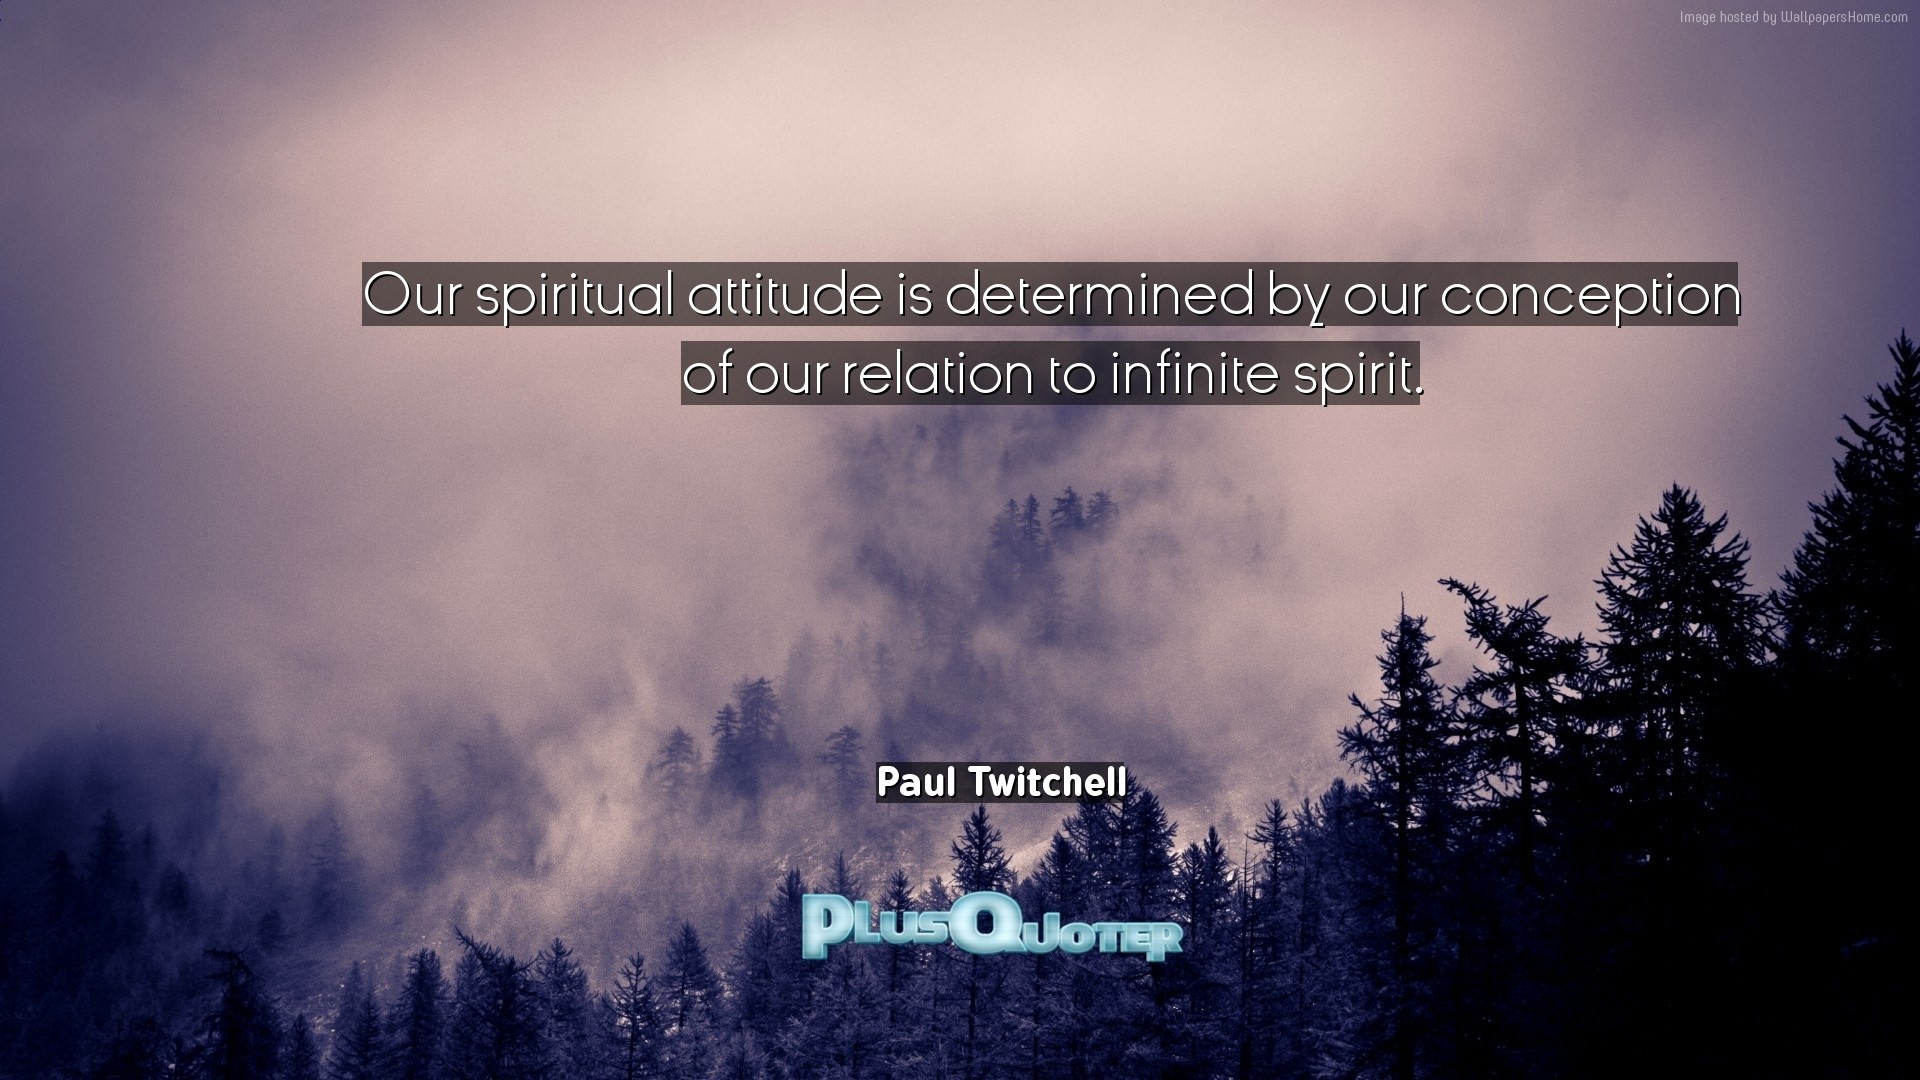 1920x1080 Download Wallpaper with inspirational Quotes- "Our spiritual attitude is  determined by our conception of